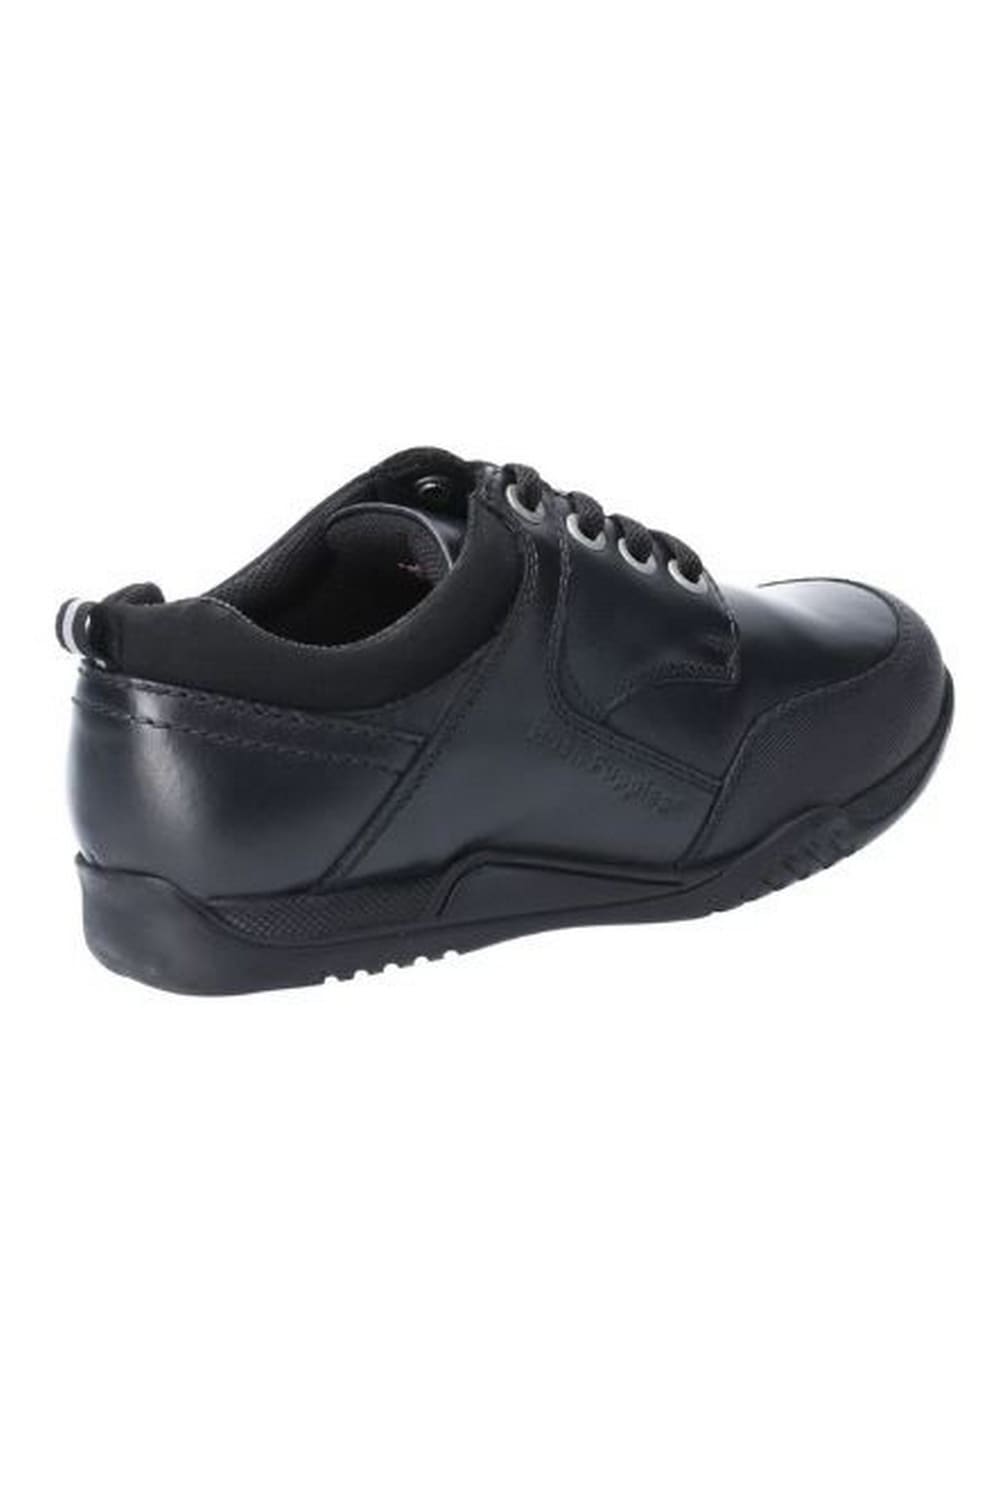 Hush Puppies DEXTER Boys Leather Padded Lace Up Trainer School Shoes Black